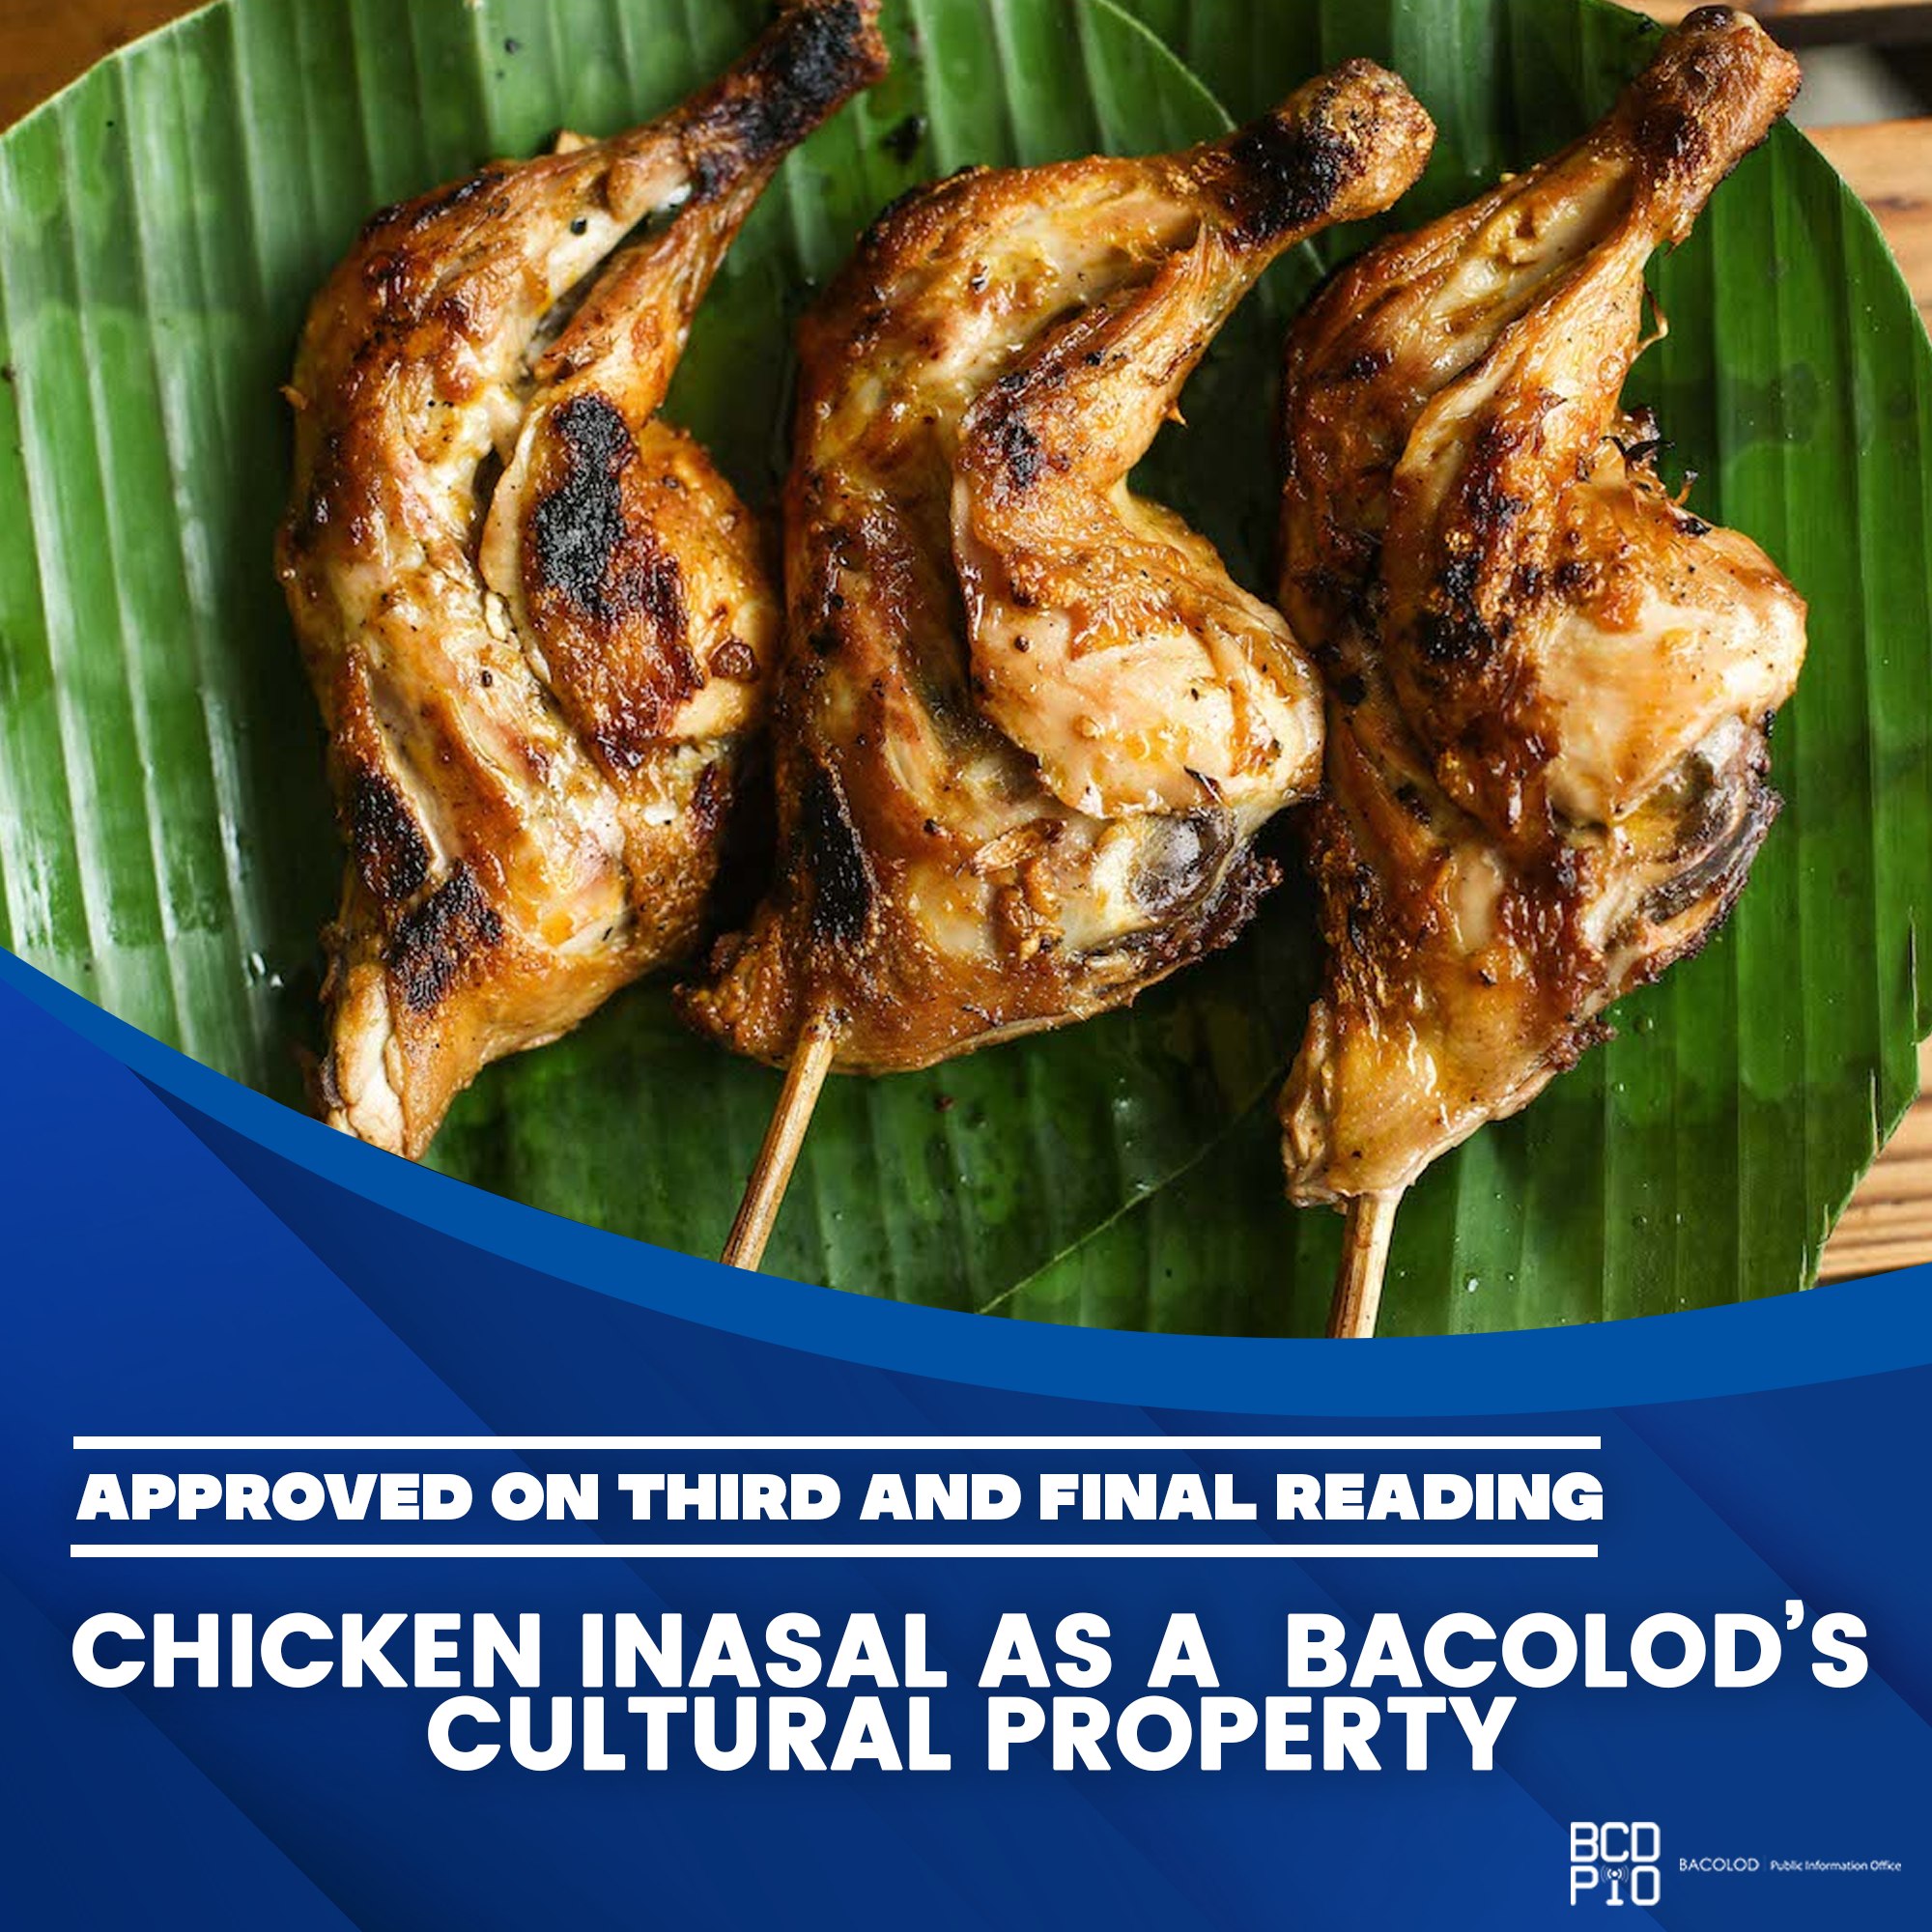 business plan of chicken inasal